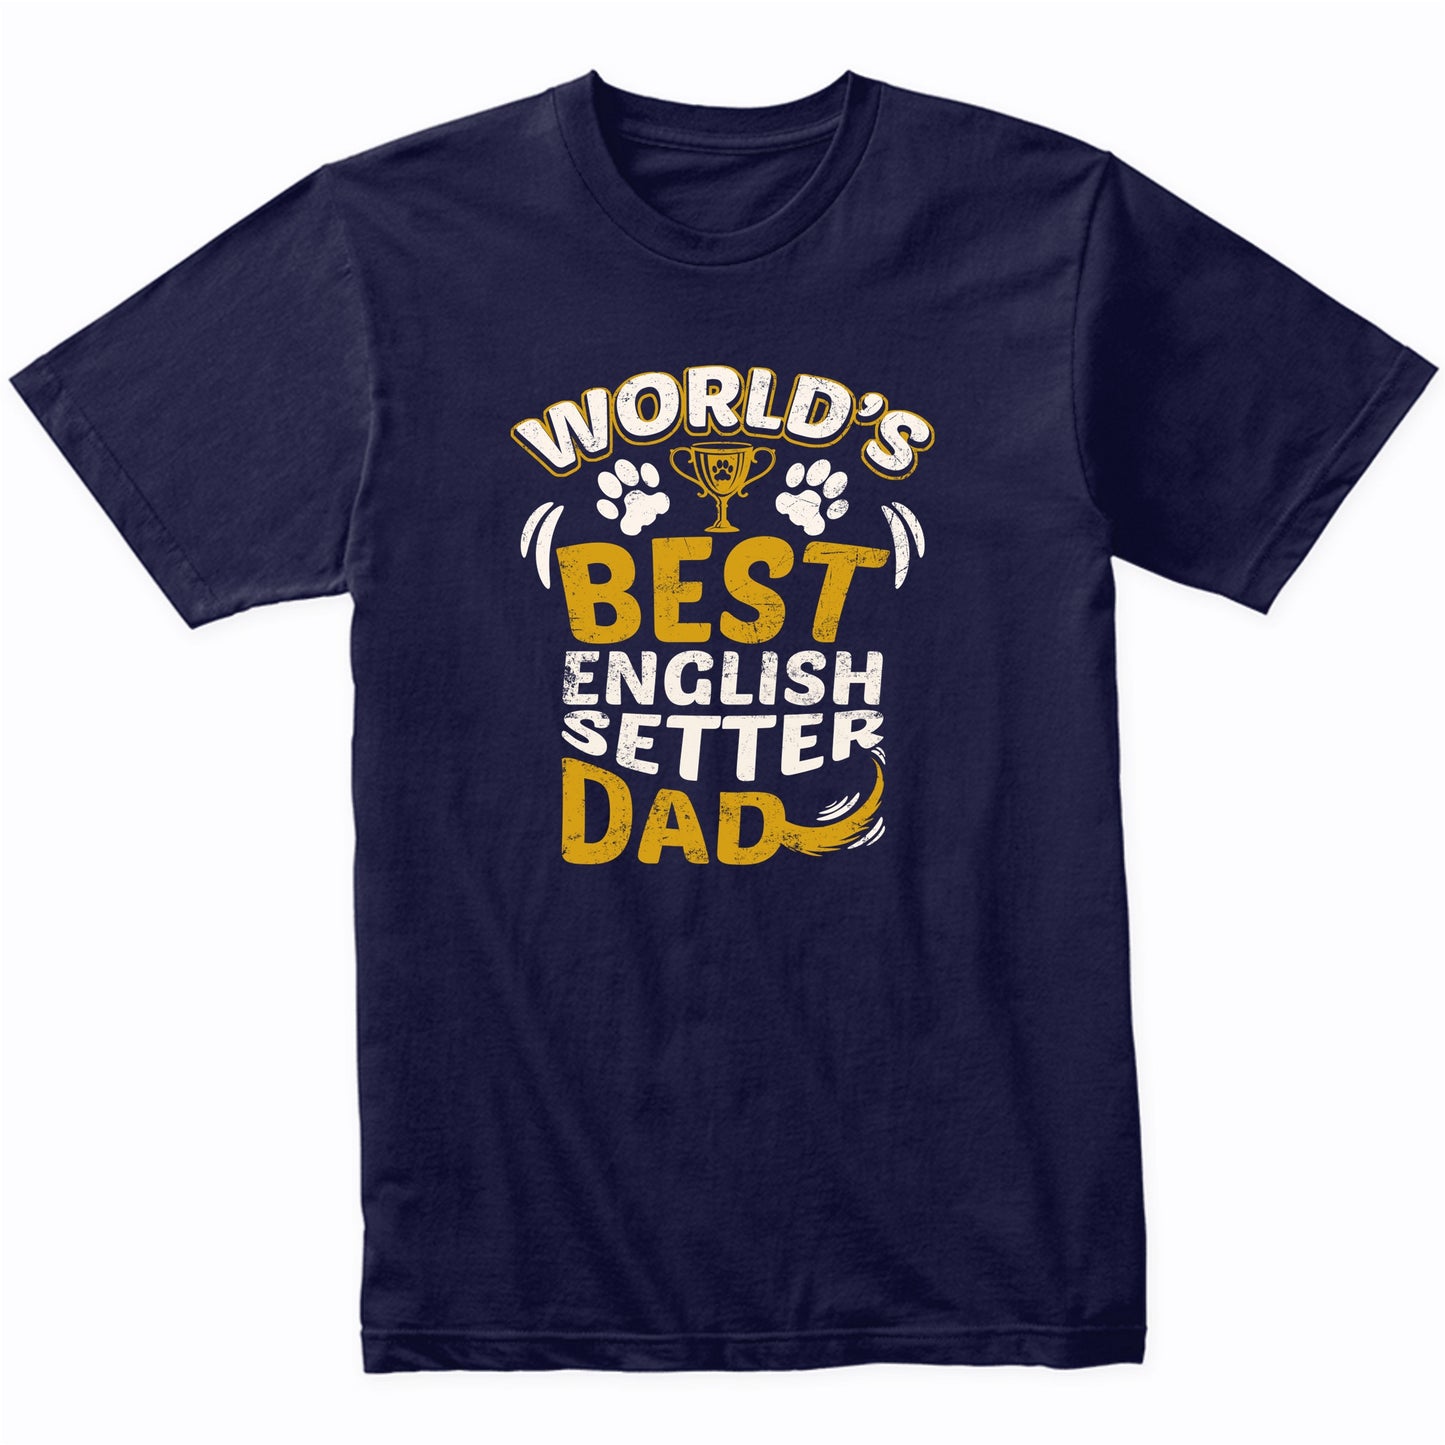 World's Best English Setter Dad Graphic T-Shirt